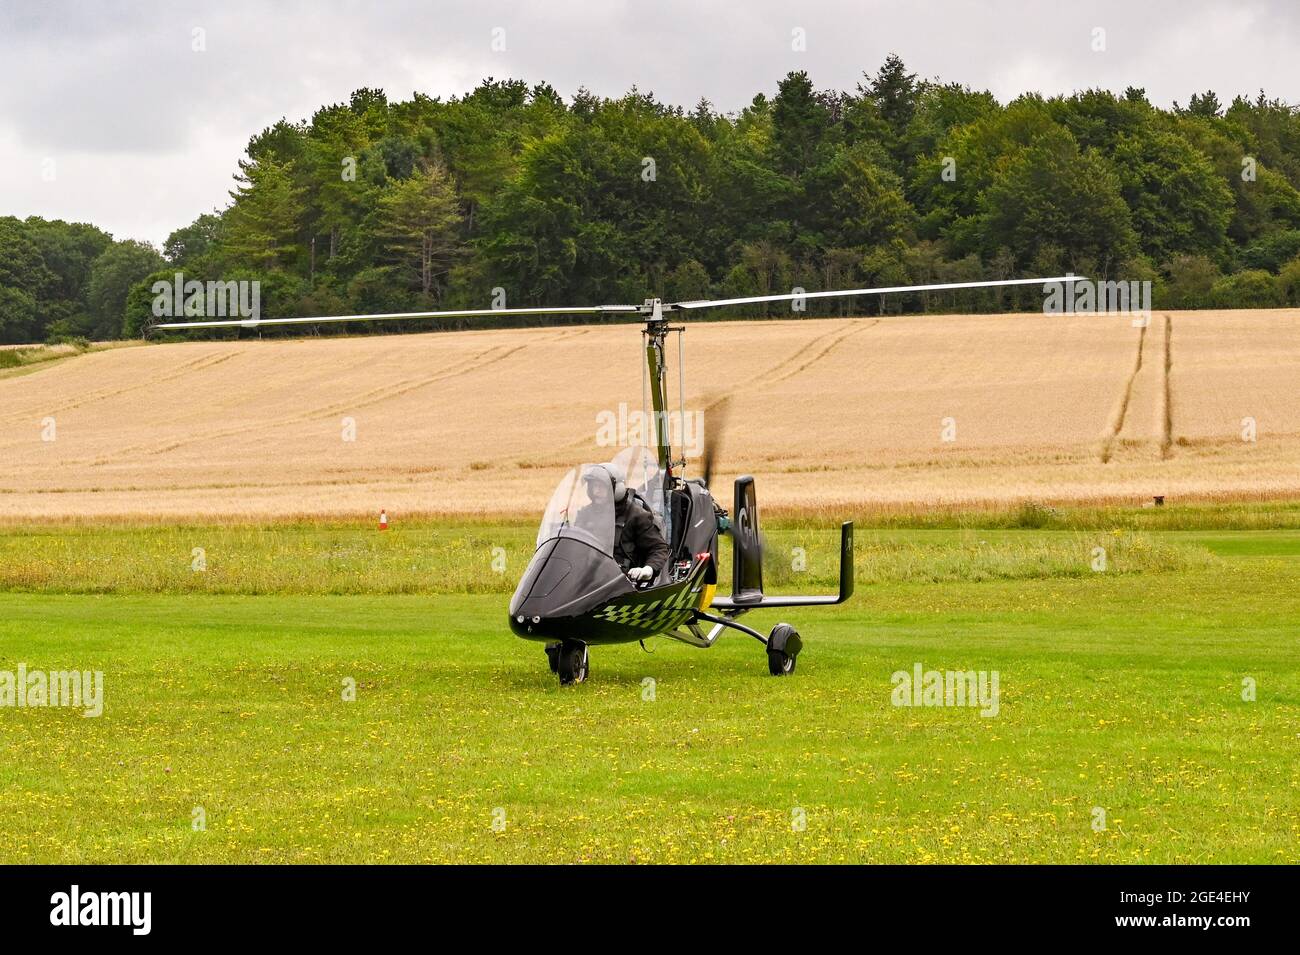 Popham, near Basingstoke, England - August 2021: Single seat gyrocopter taxiing off the grass runway after landing at Popham airfield Stock Photo